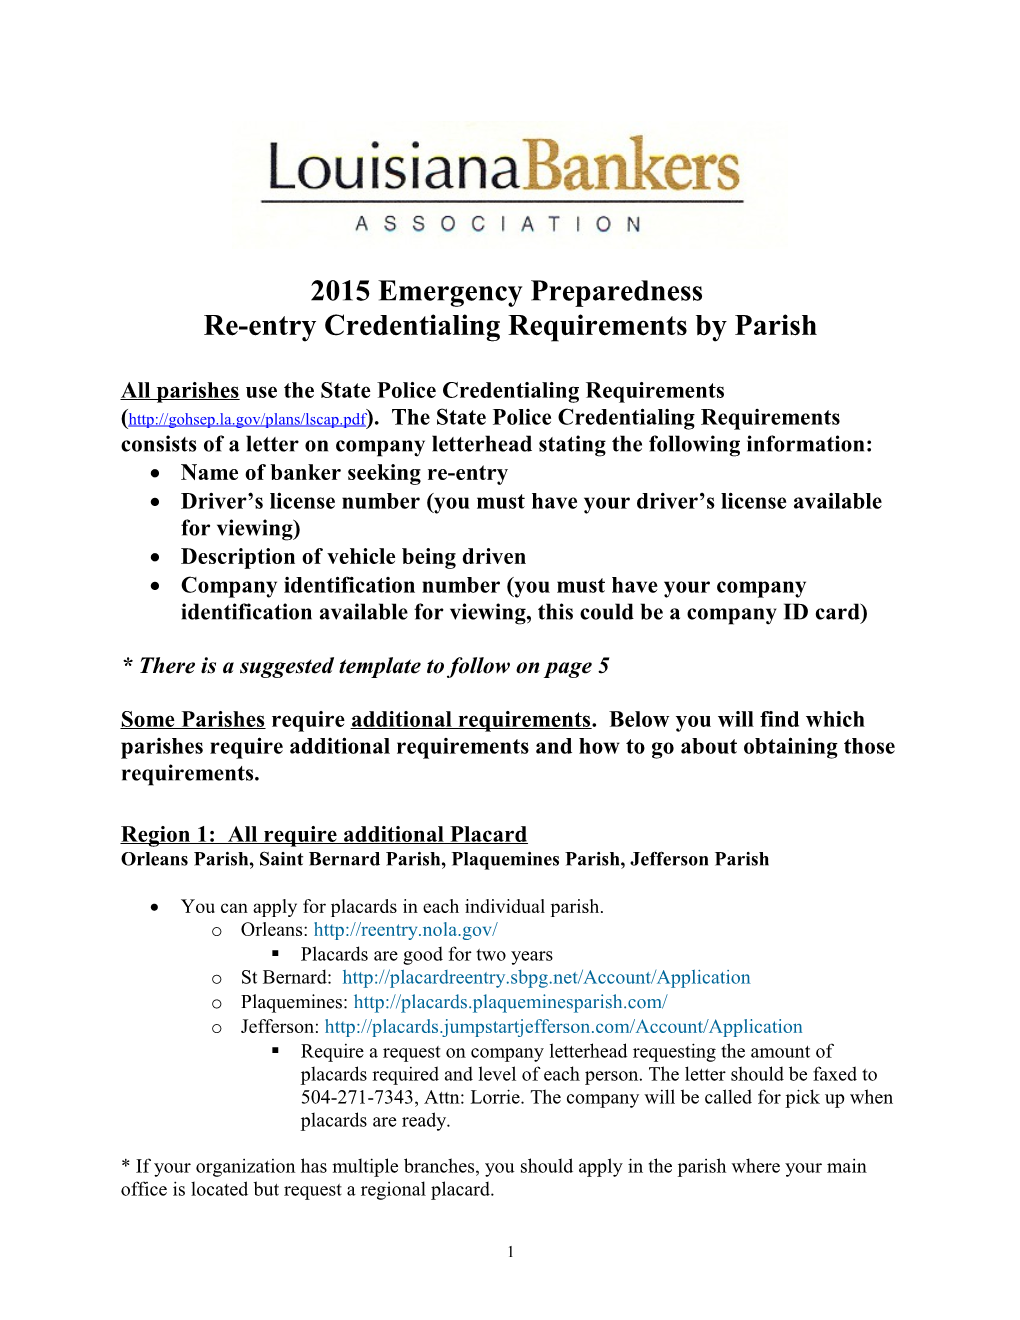 Re-Entry Credentialing Requirements by Parish